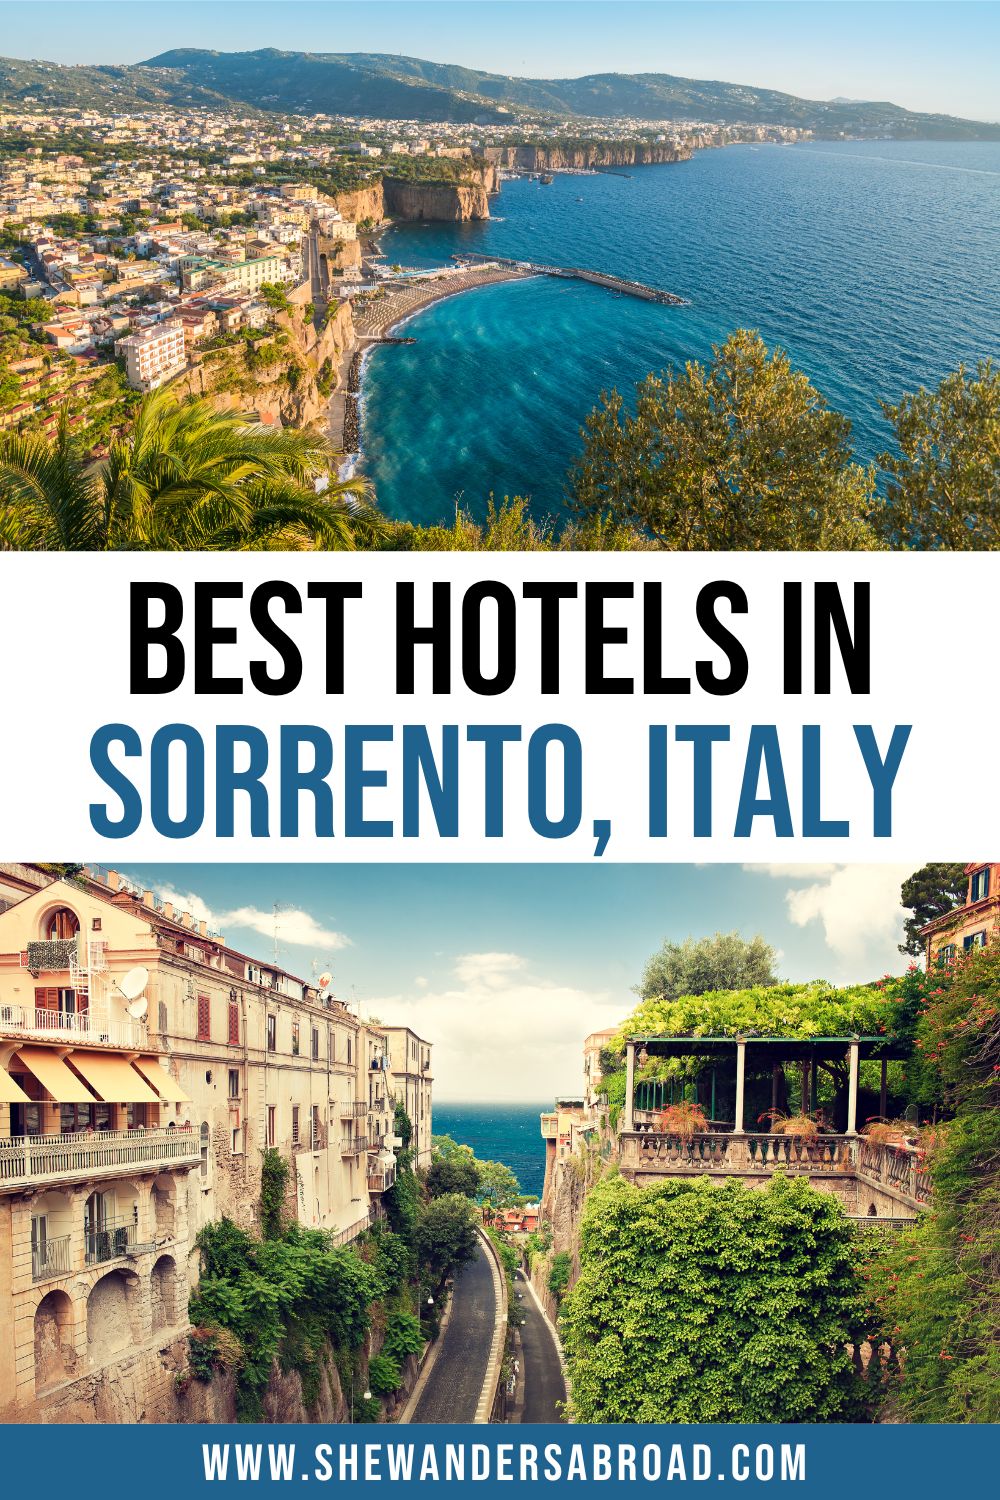 Best Hotels in Sorrento Italy with Sea Views